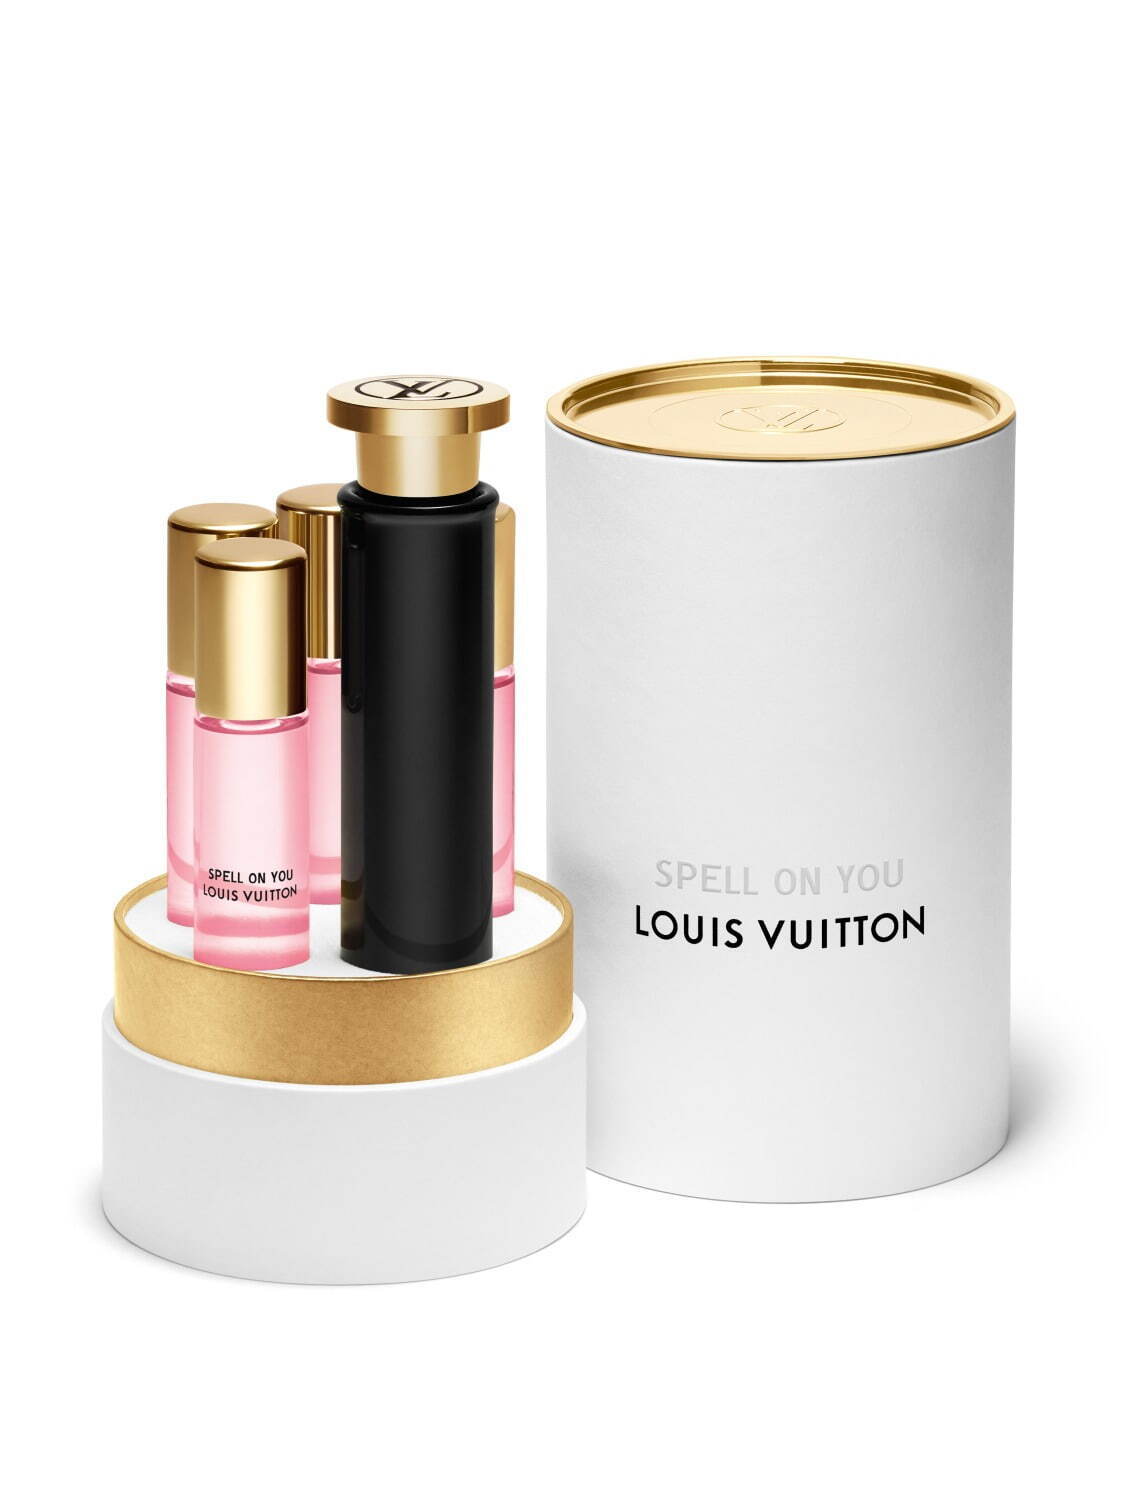 LOUIS VUITTON スペルオンユー SPELL ON YOU